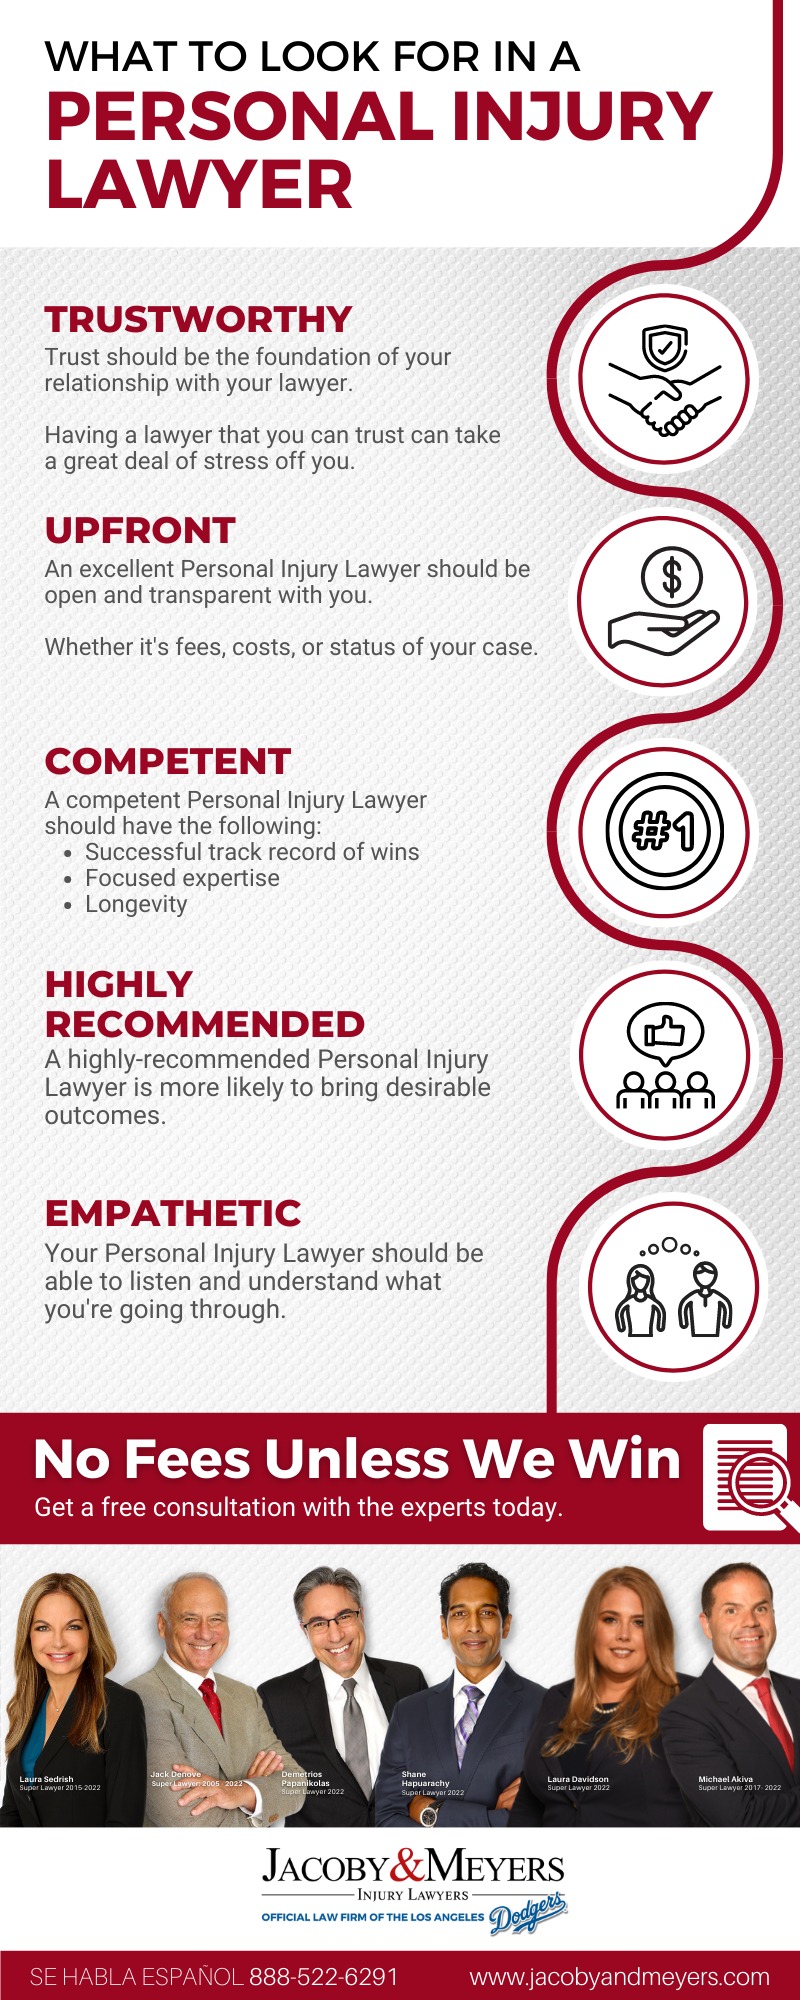 What to Look for in a Personal Injury Lawyer infographic